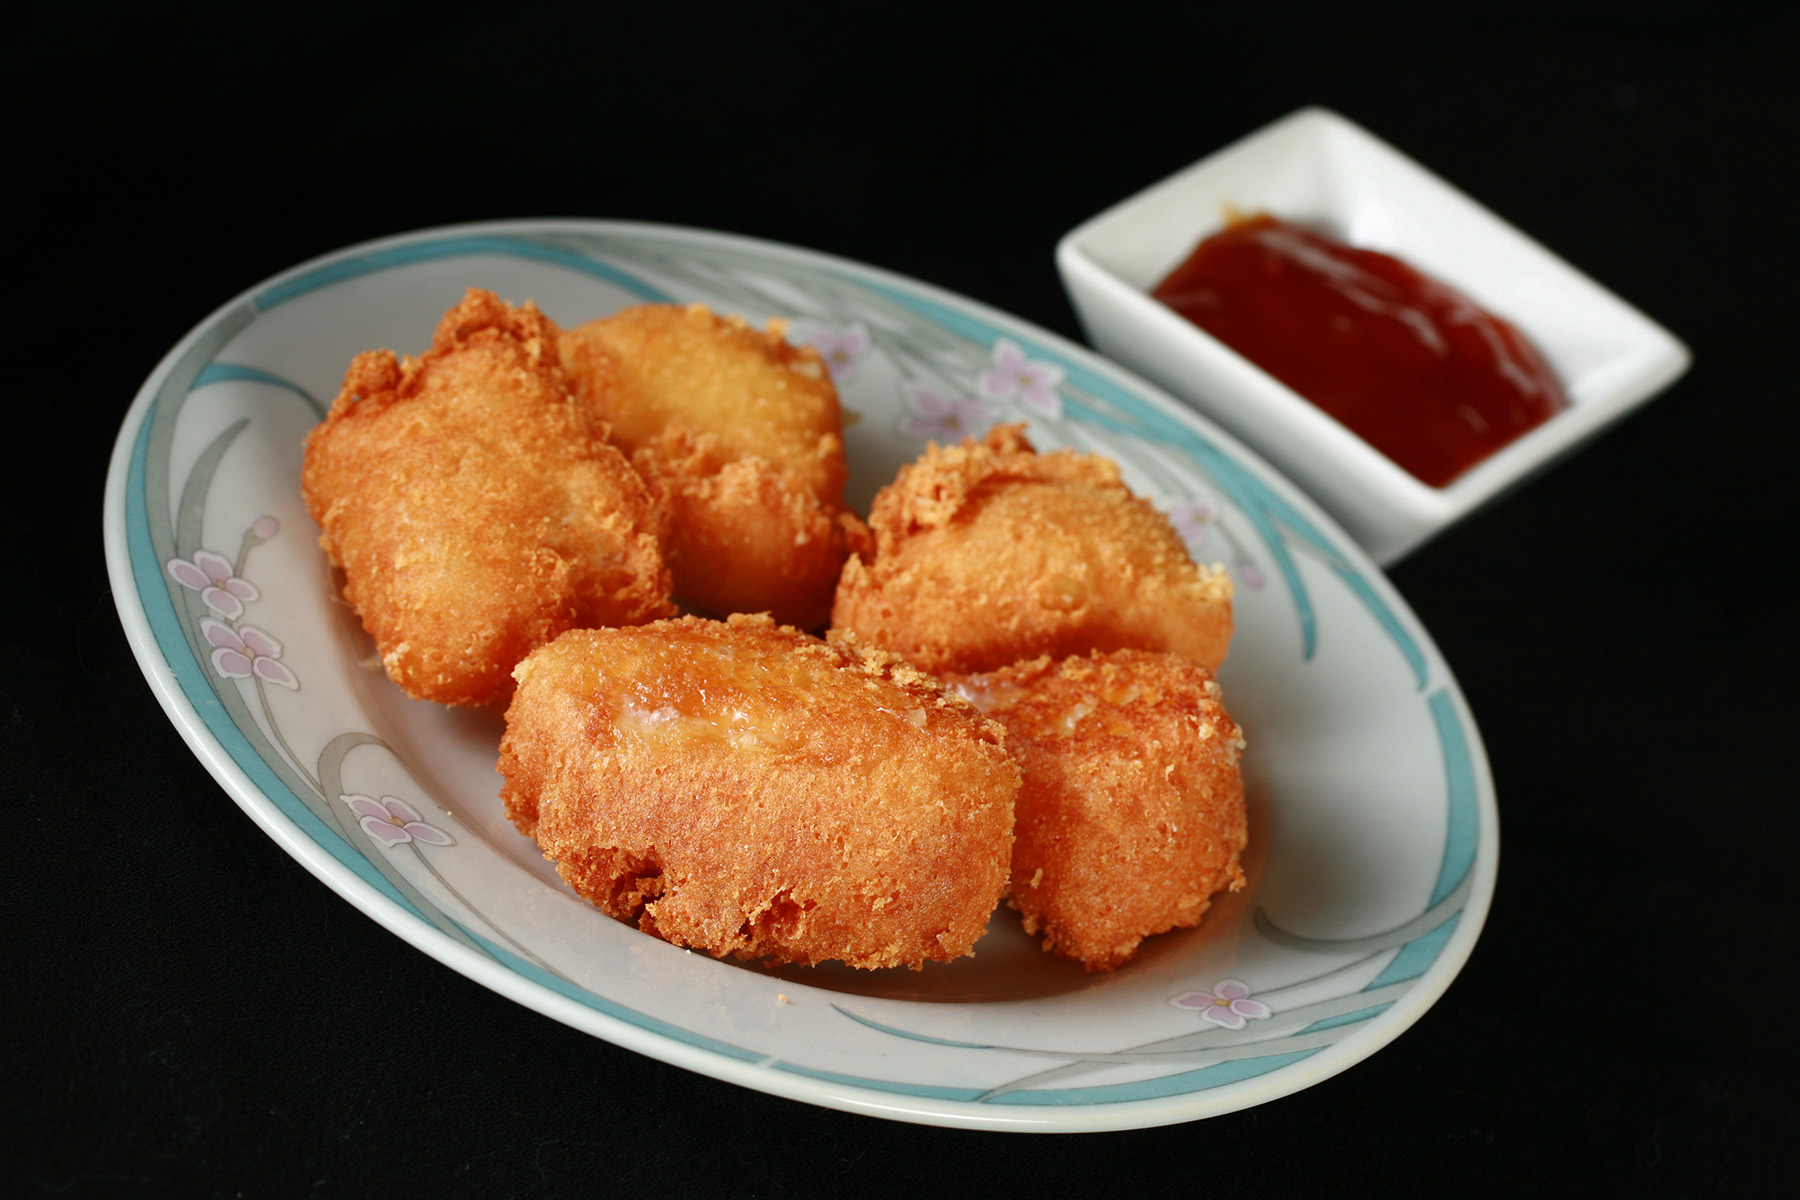 Several small wedges of gluten-free deep fried brie. There is a small bowl of apricot preserves next to the plate.